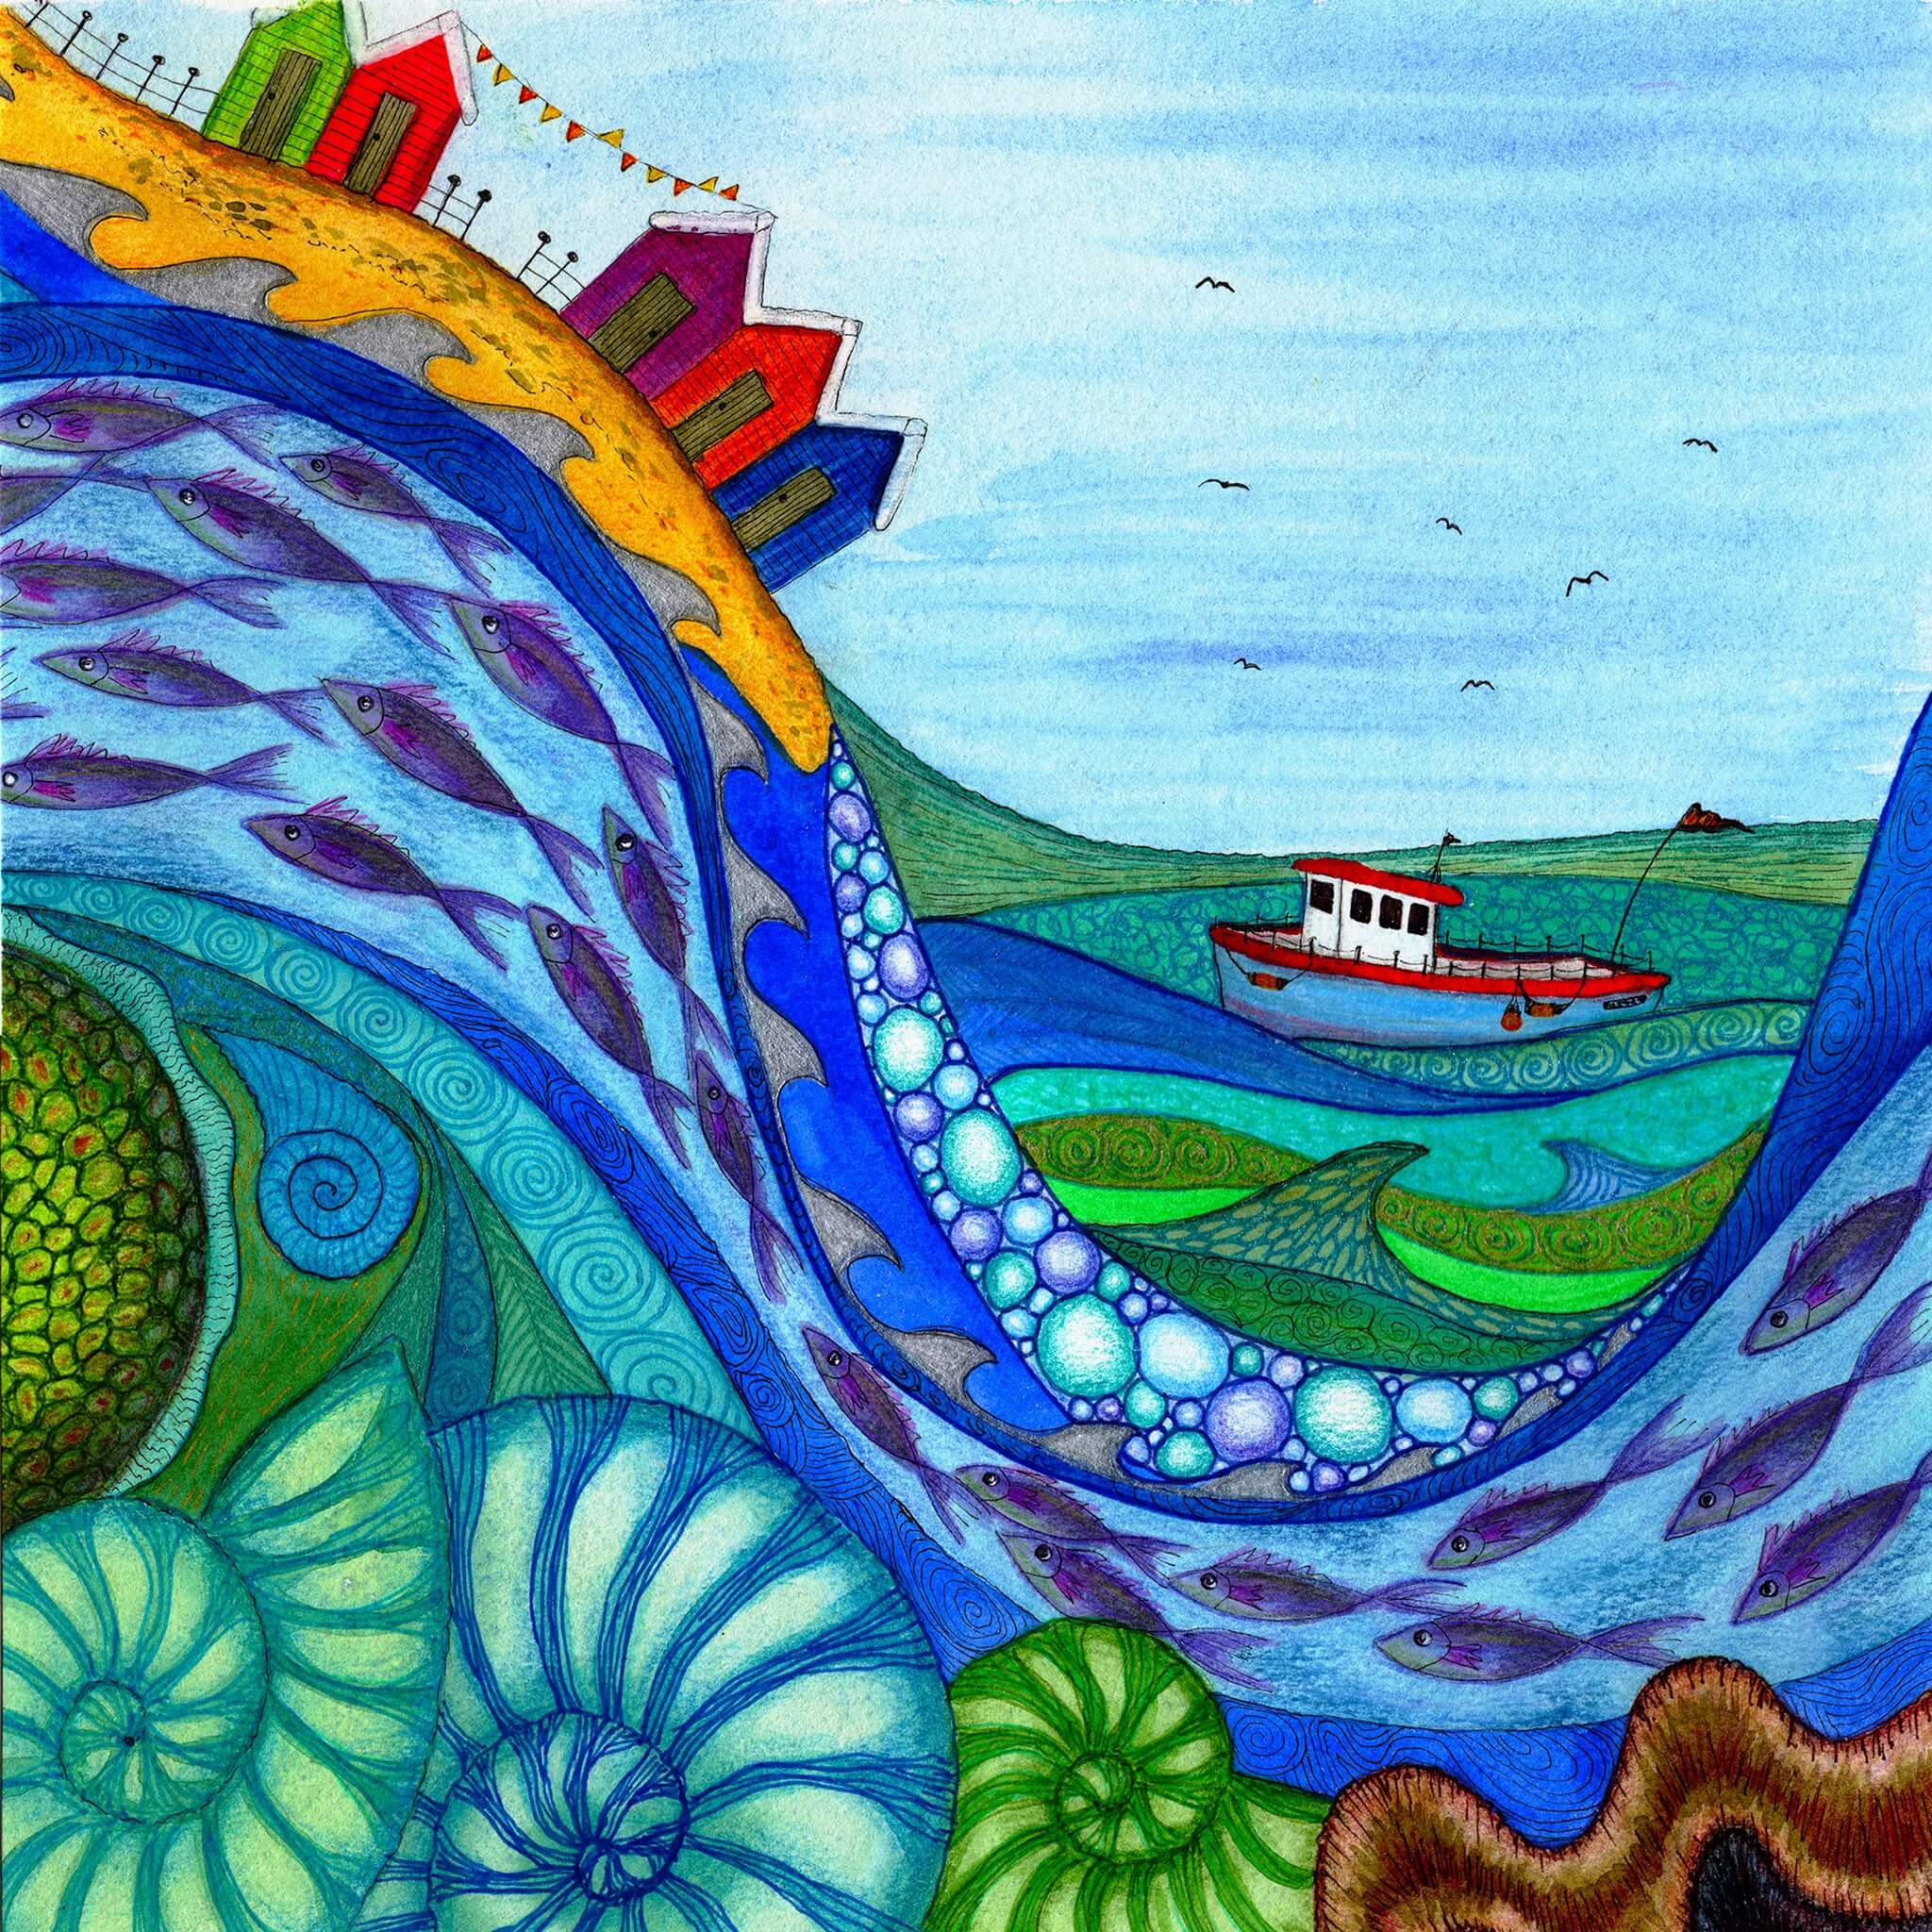 Painting by sea-inspired artist Bridget Wilkinson, showing, in a naive, colorful style, a hill close to the water. On the hill are five houses, and three of them seem to fall into the sea. On the water is a fishing boat. The waves are full of fish. Each individual wave has very small, abstract, and organic details painted on it. In the foreground, down, are some big shells. In the background, seabirds are flying.